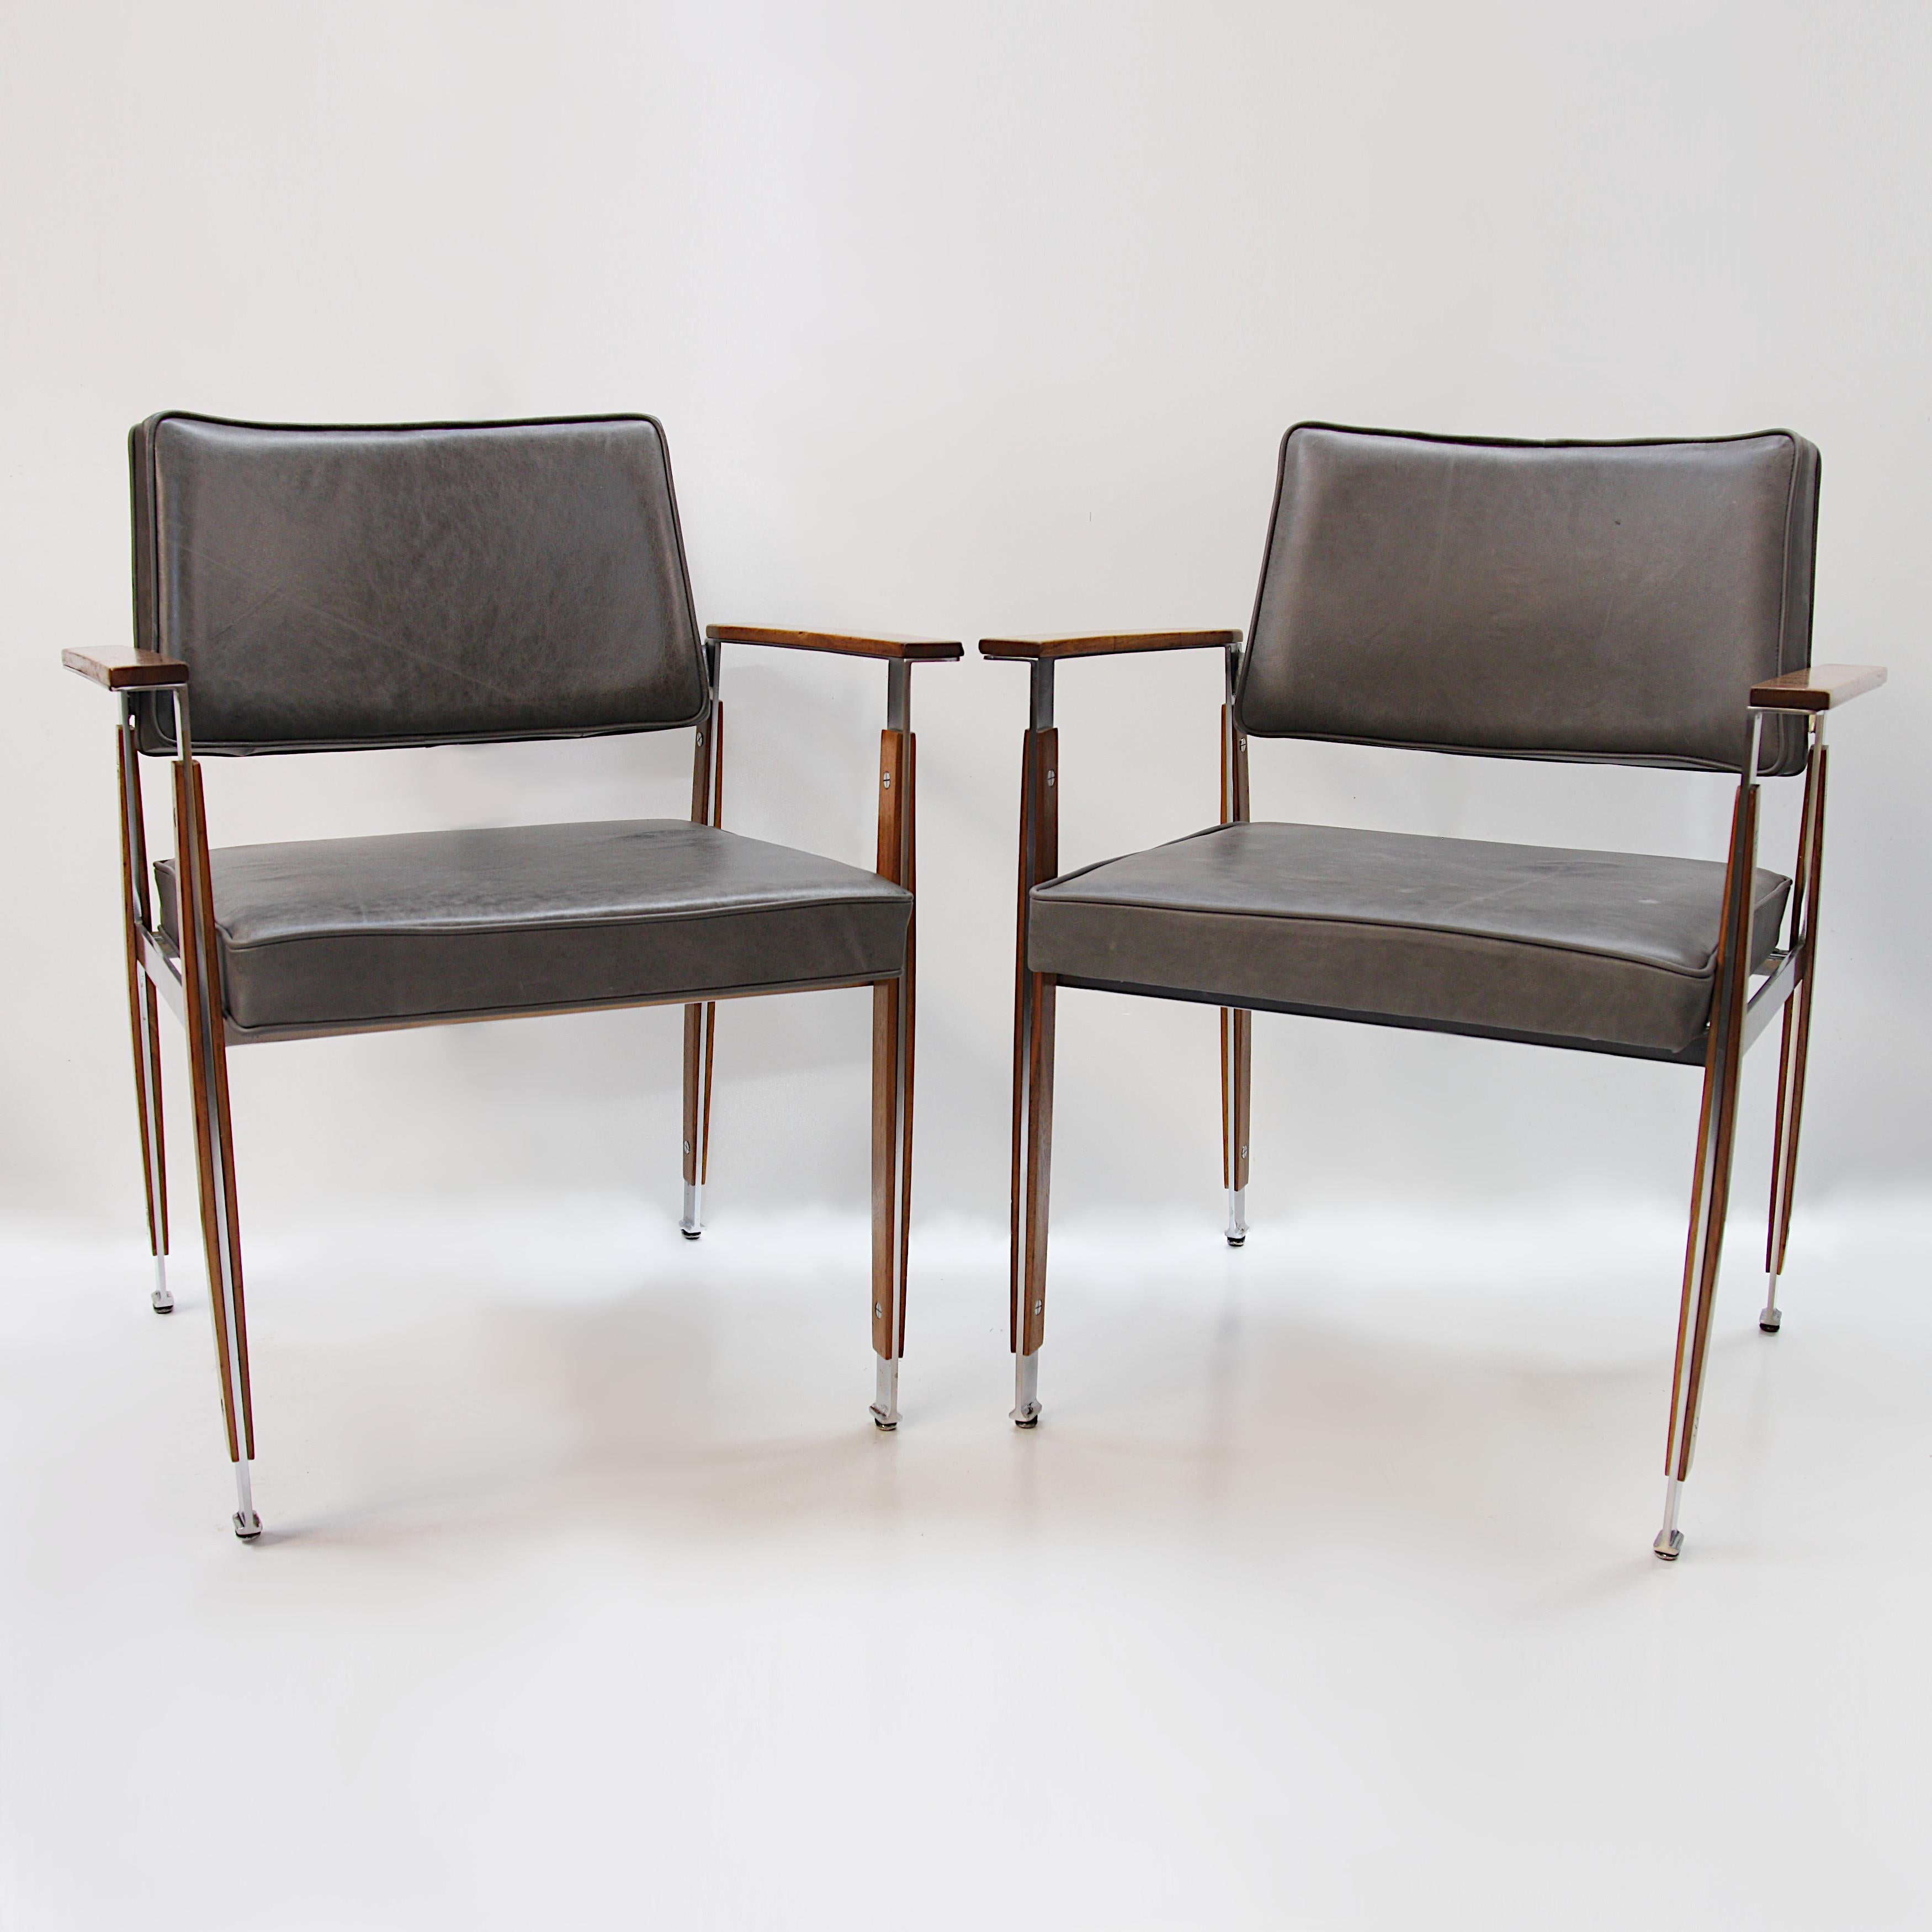 American Pair of Mid-Century Modern Side Chairs by William B Sklaroff for Robert John For Sale